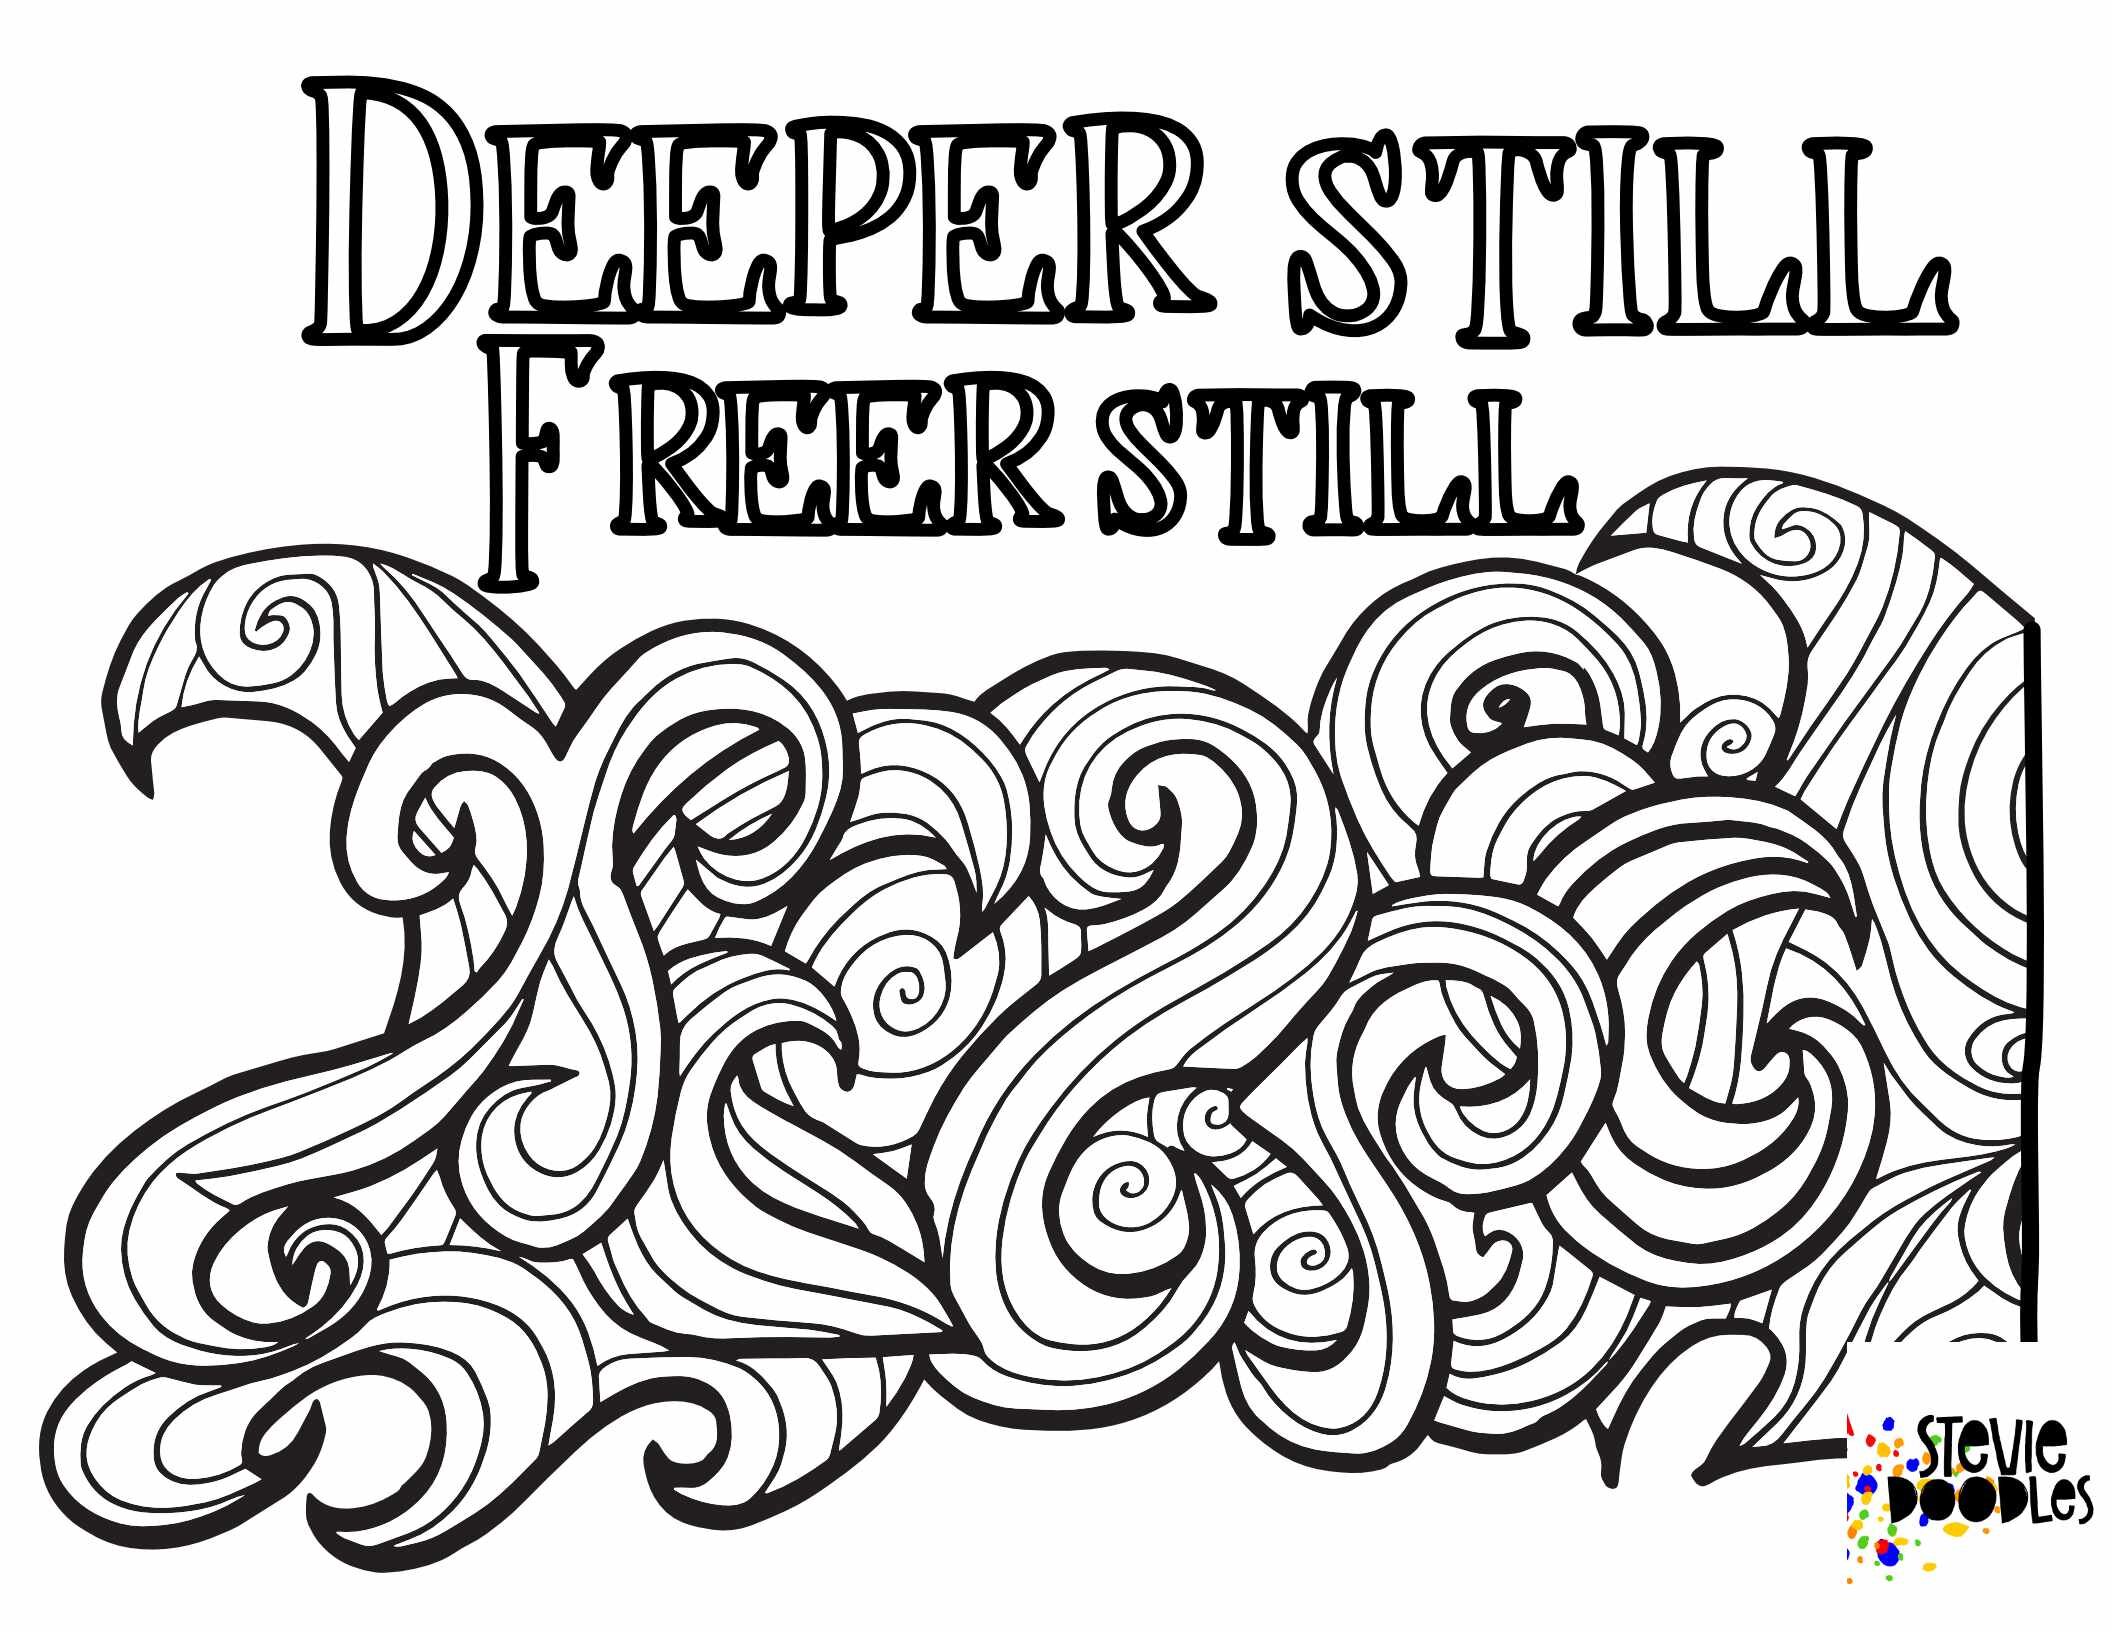 Deeper still Freer still 3 free coloring pages inspired by the Experiencing God bible study Over 1000 free coloring pages at Stevie Doodles